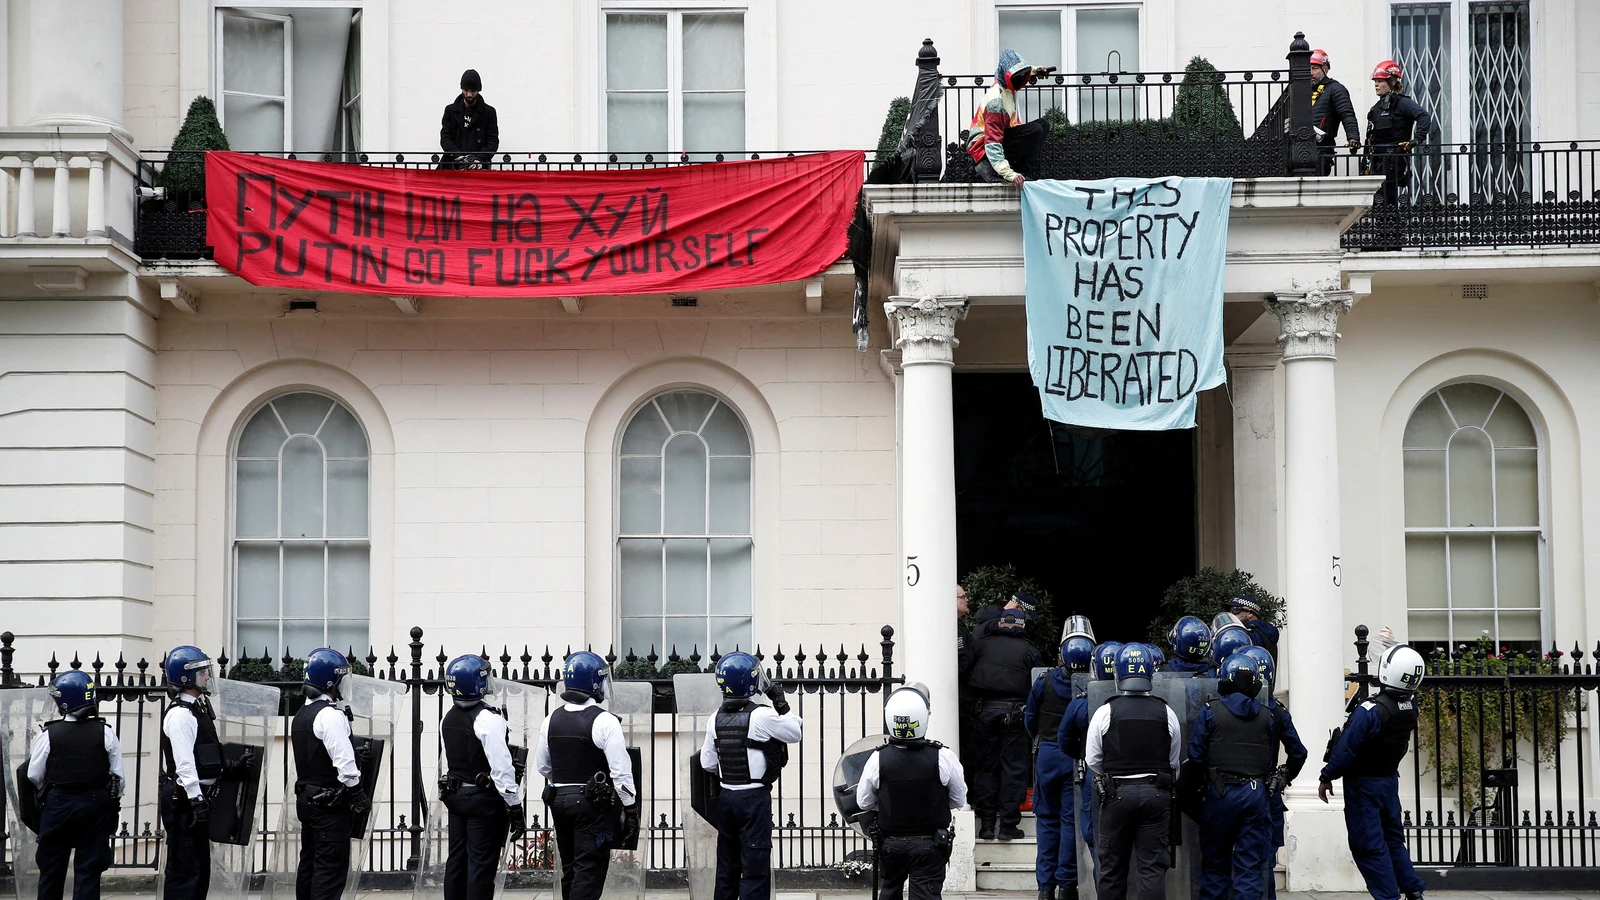 ‘You occupy Ukraine, we occupy you’: Squatters at Russian oligarch’s London home, cops move in